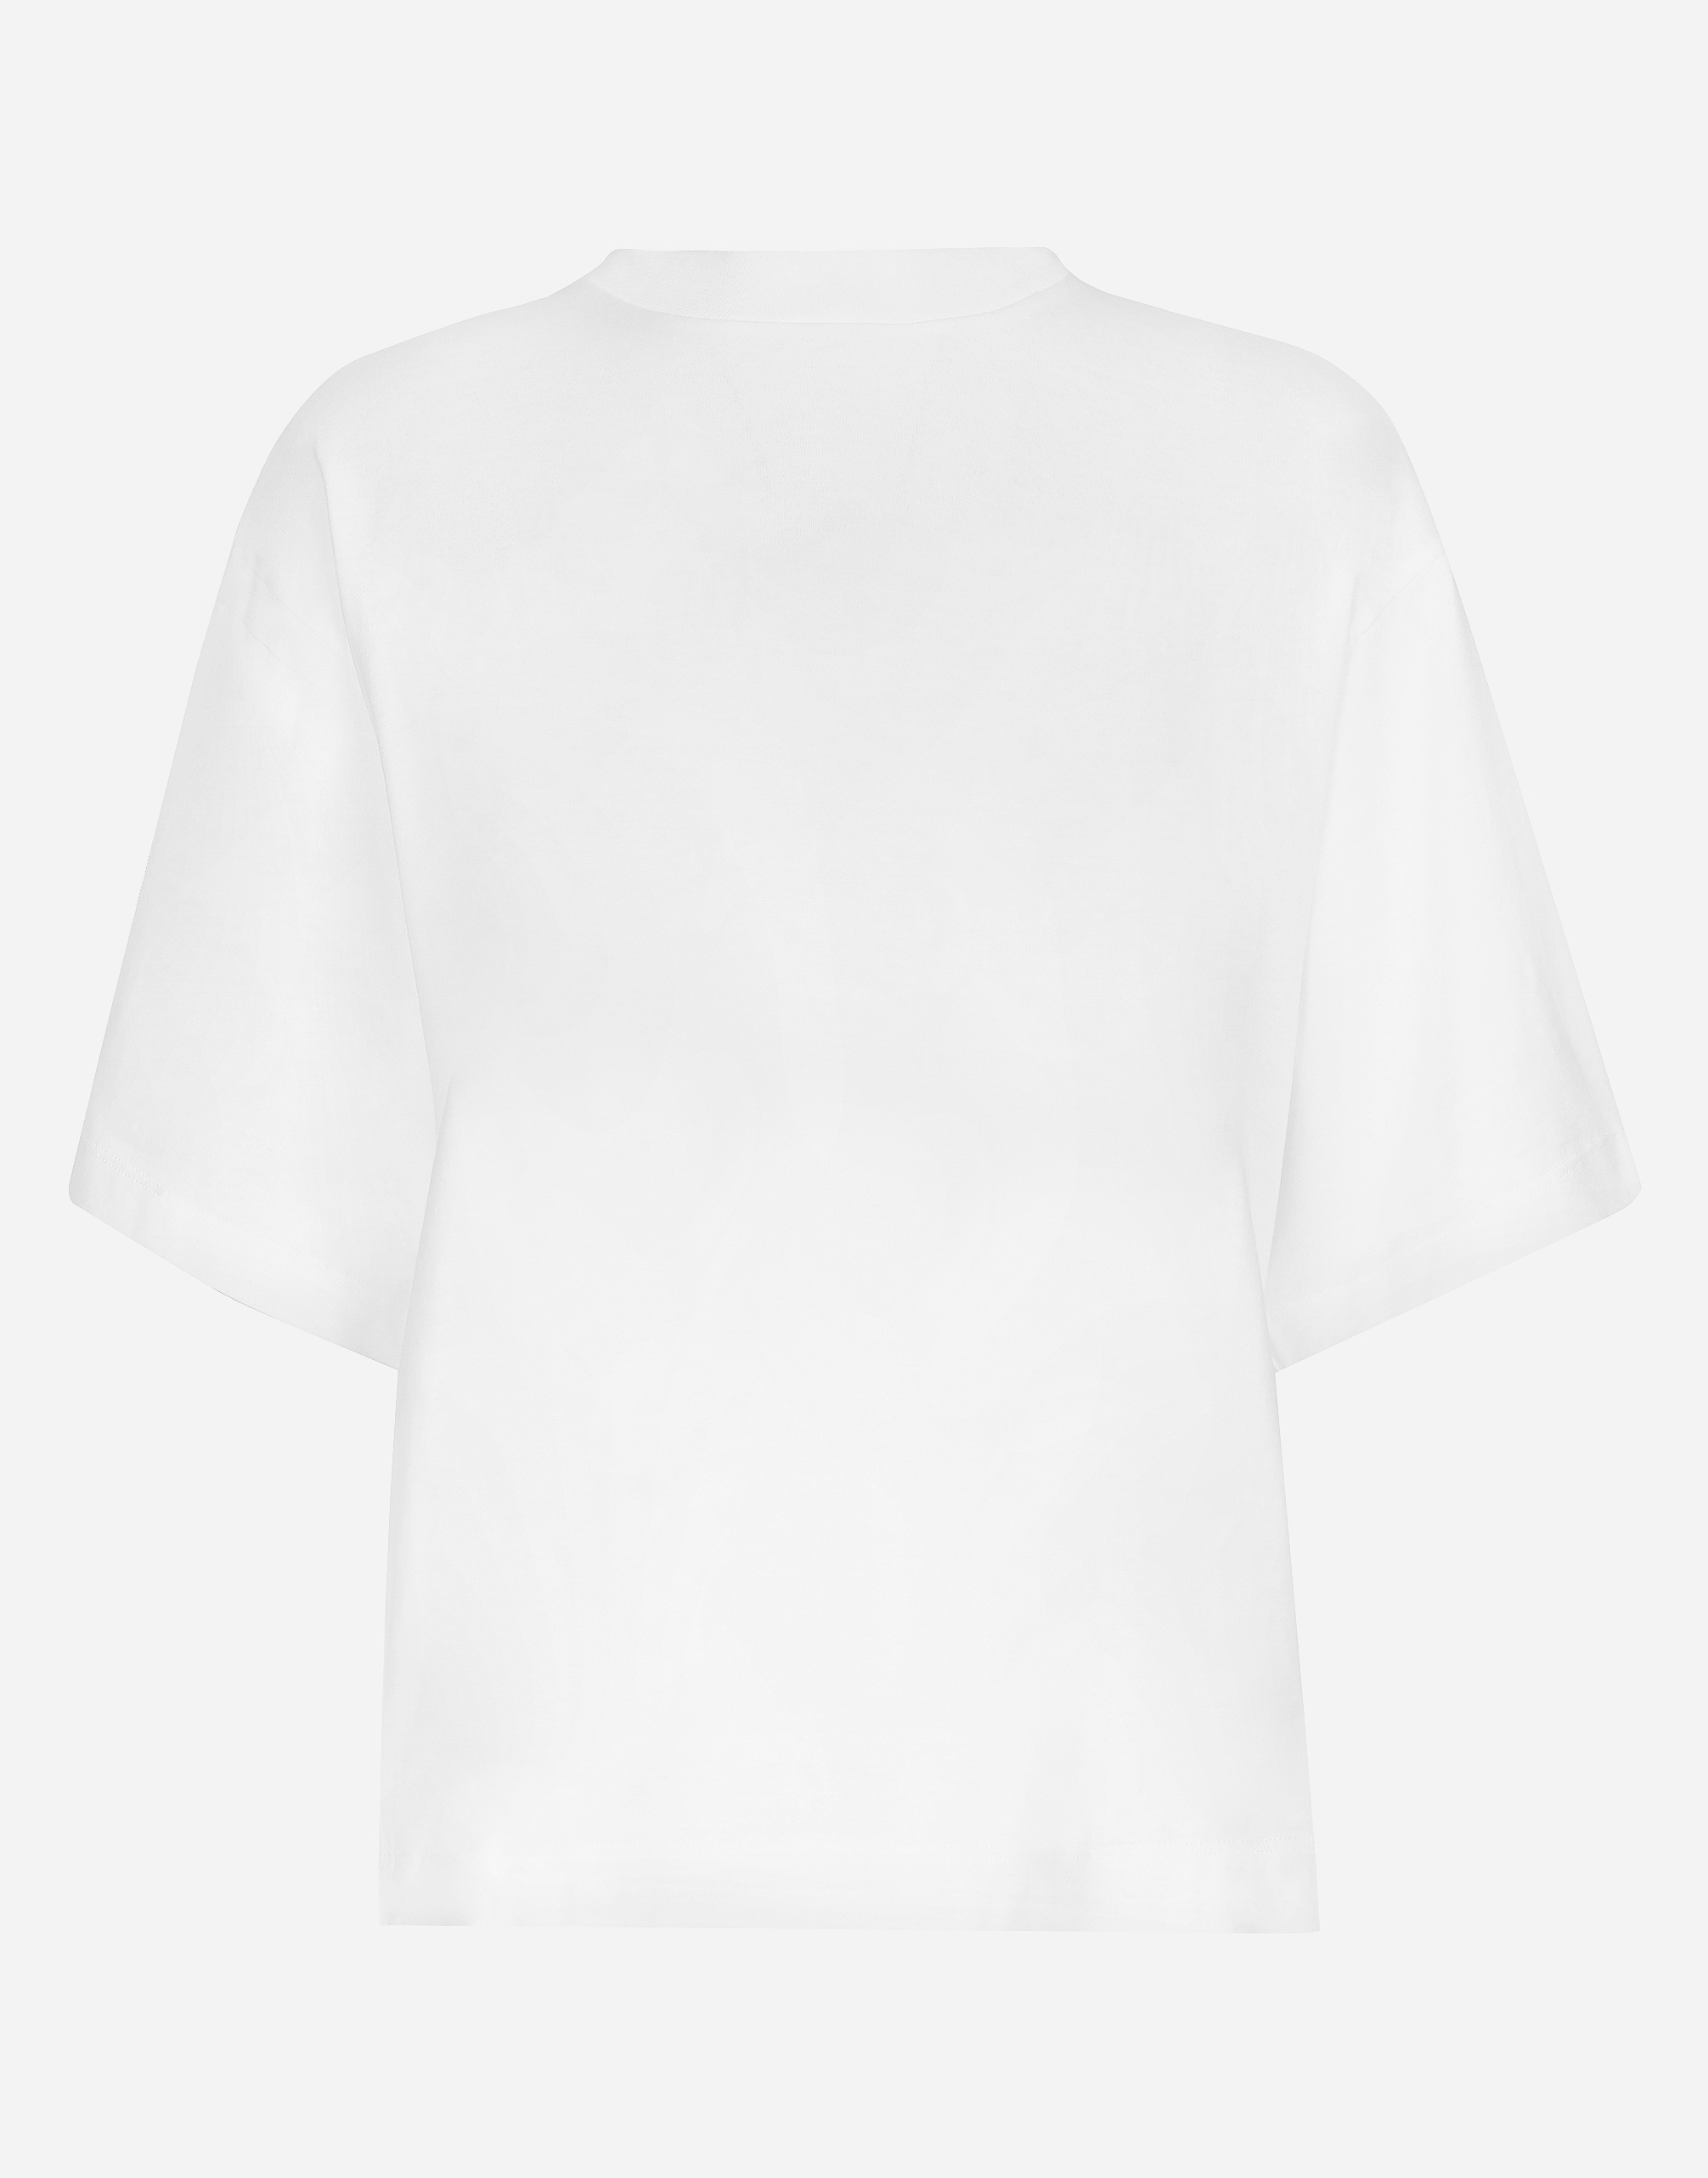 Shop Dolce & Gabbana Short-sleeved Cotton T-shirt With Dolce&gabbana Lettering In White